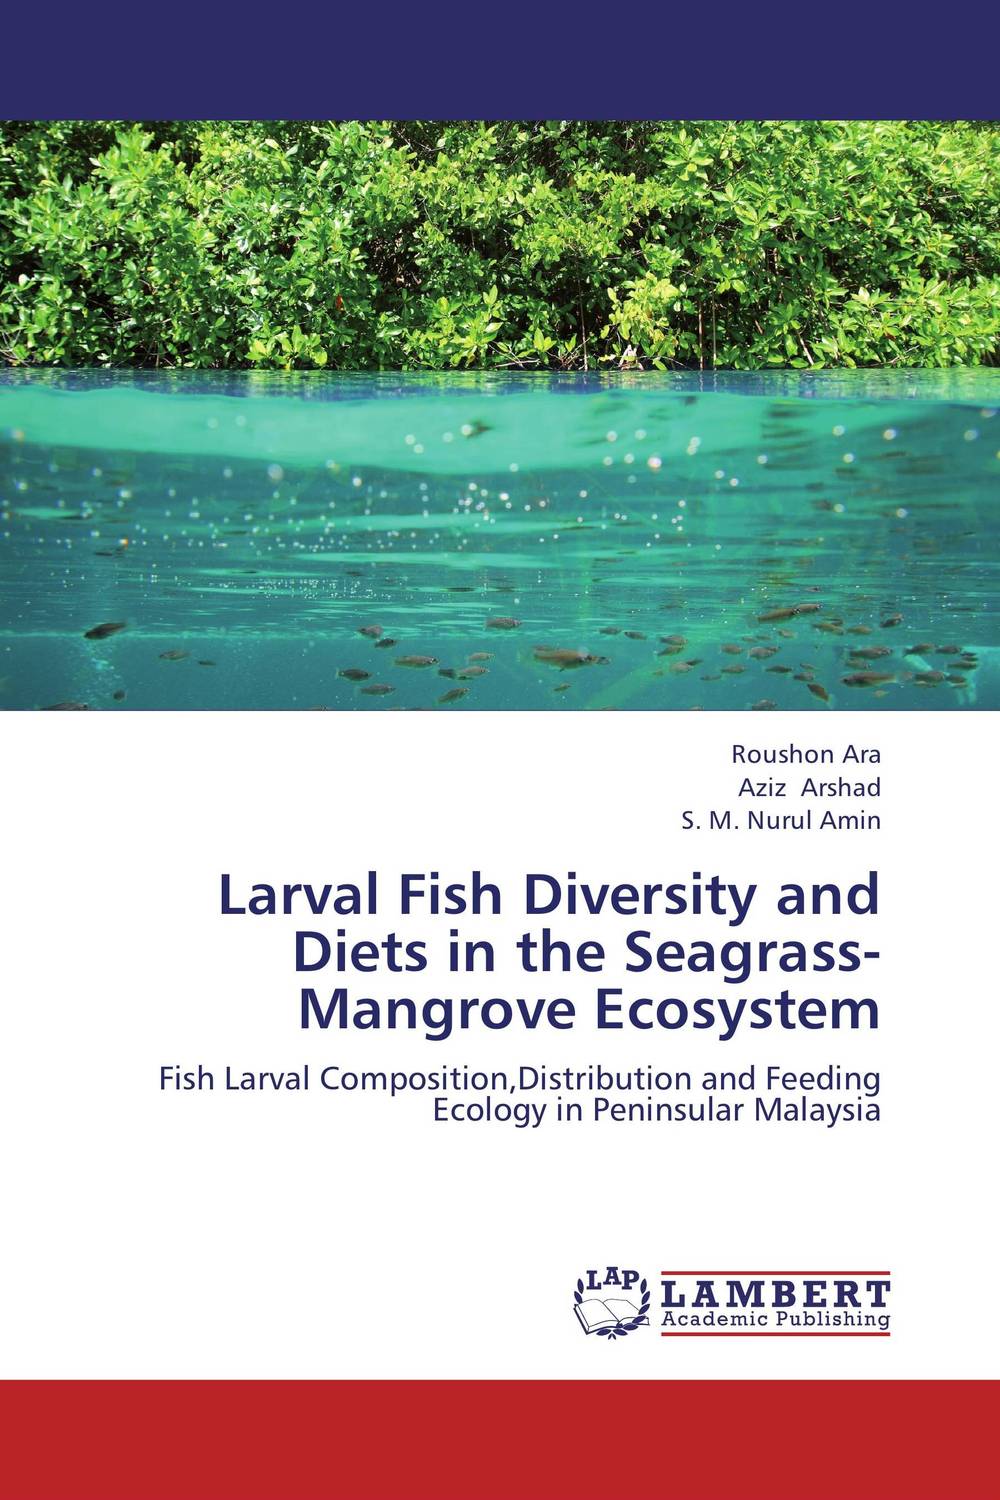 Larval Fish Diversity and Diets in the Seagrass-Mangrove Ecosystem